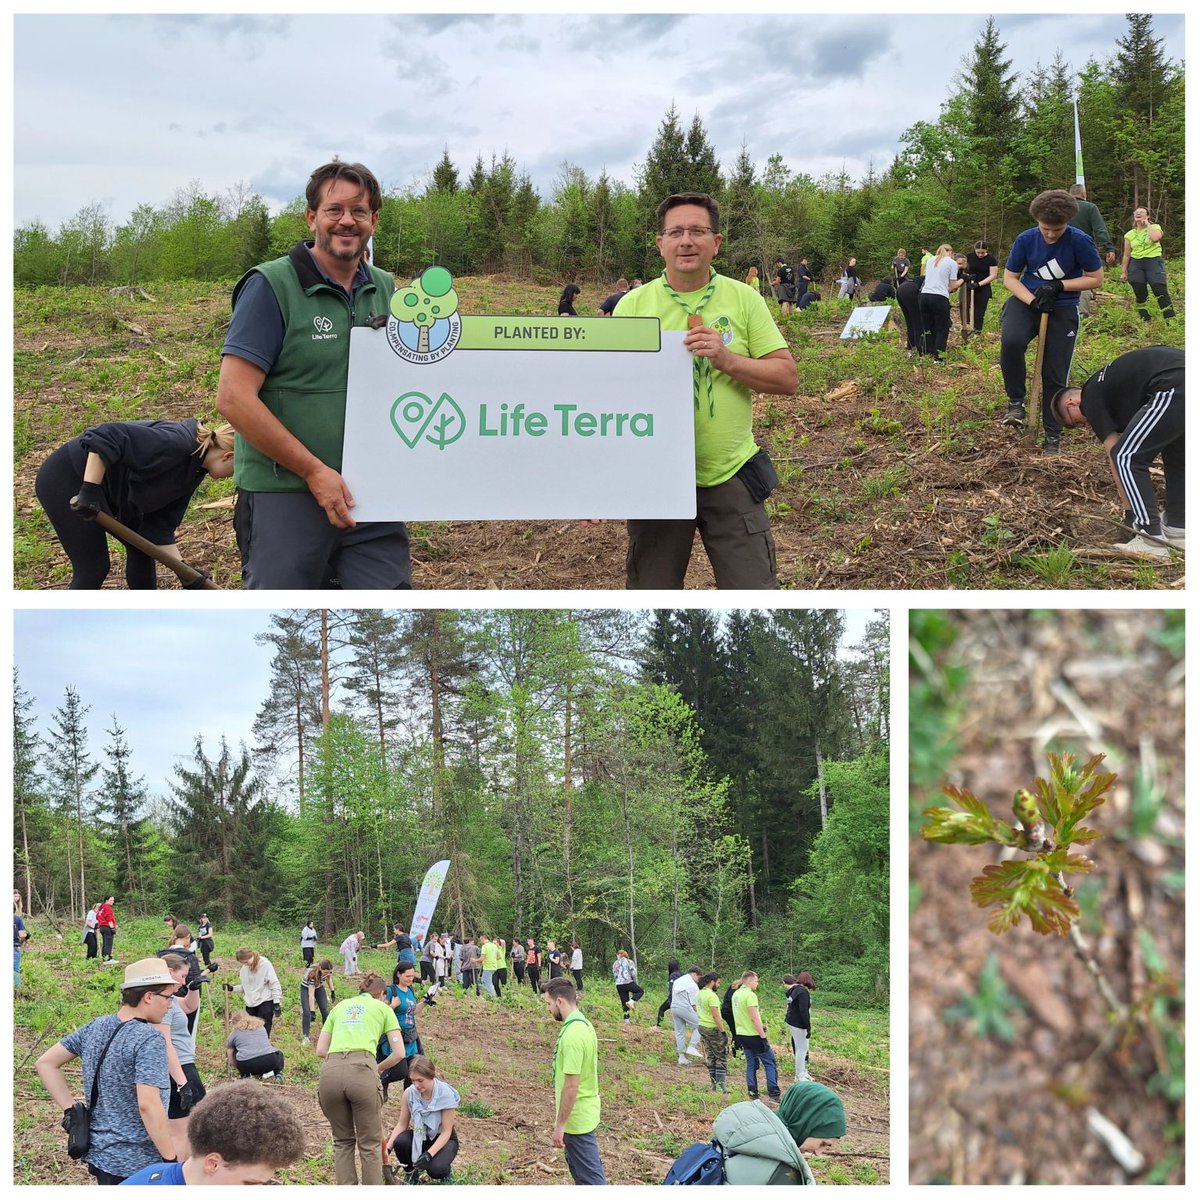 Life Terra is now present in Croatia 🇭🇷 Our reforestation efforts keep expanding across Europe. This time, the team planted in an Oak area with the alumni of three local schools, combining environmental action and community awareness. #croatia #climateaction